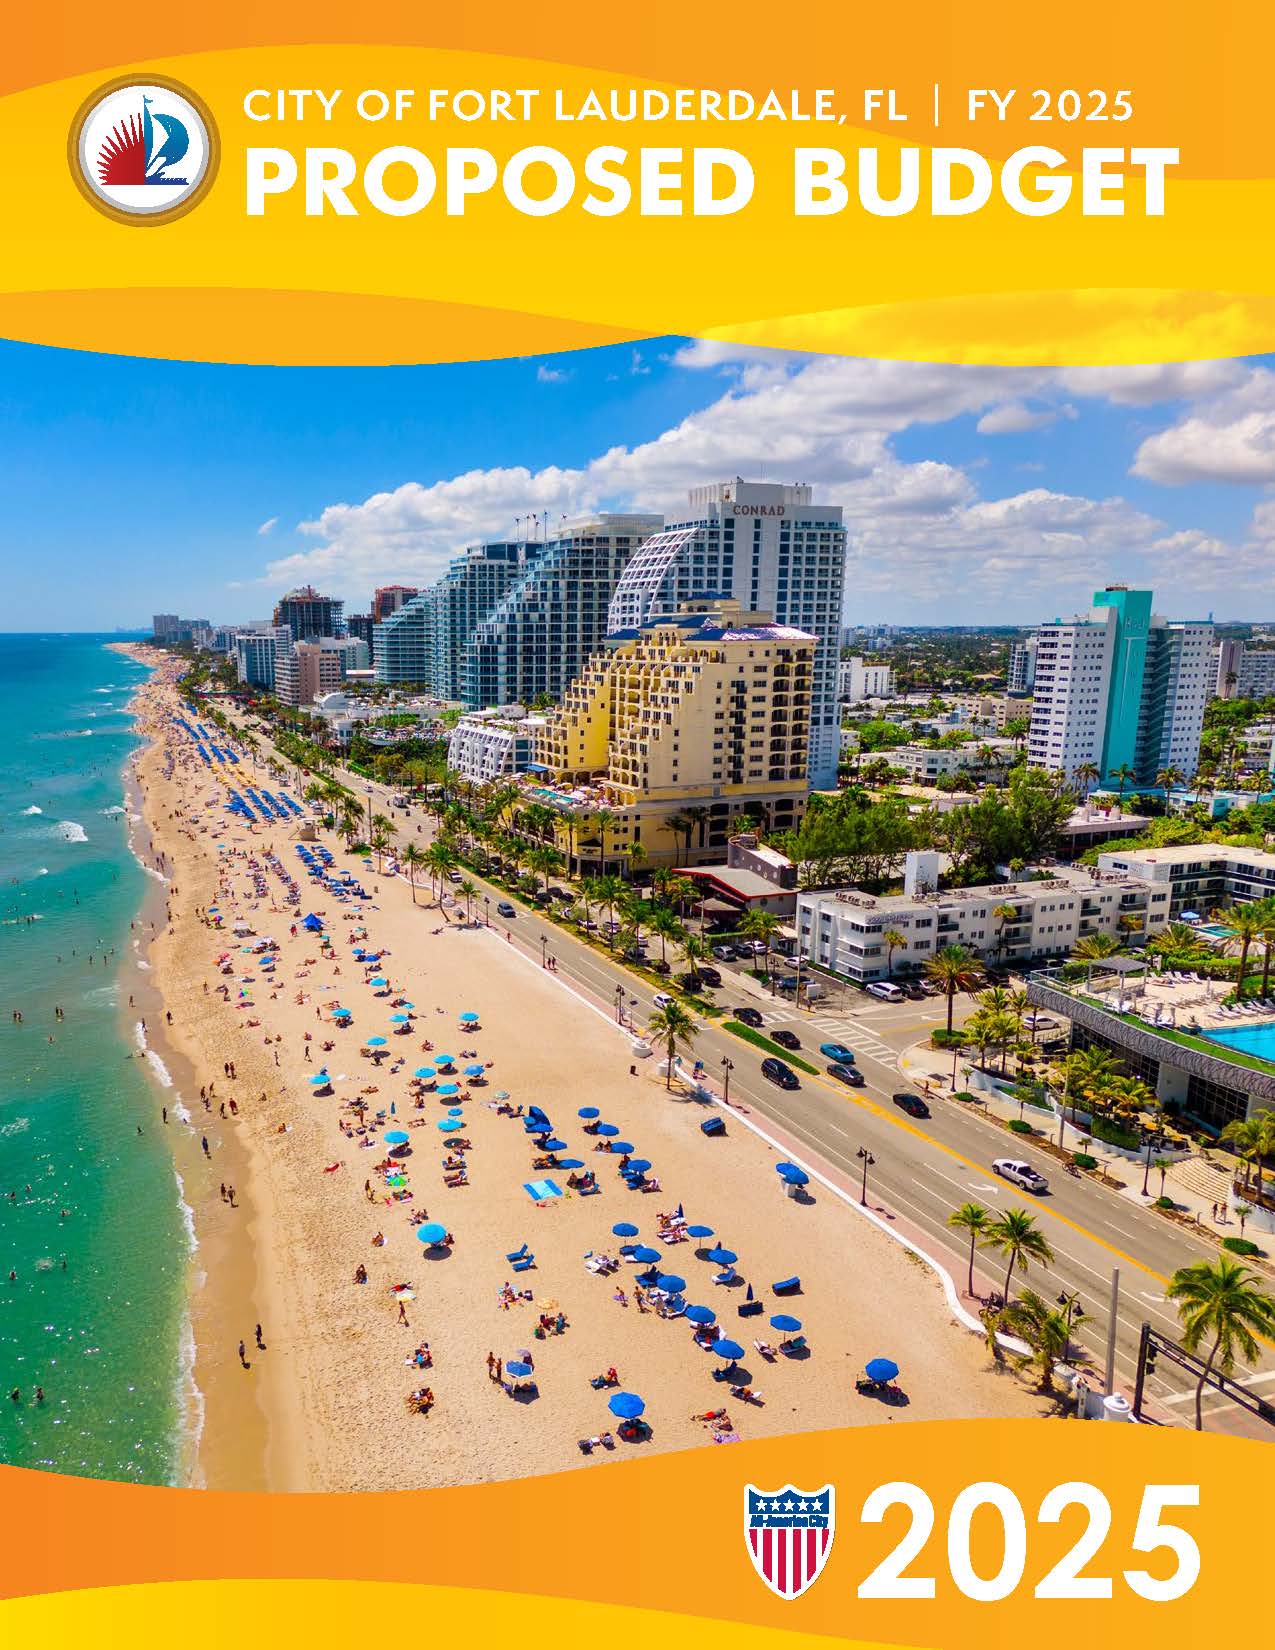 Budget Cover 2025_Proposed_Final WEB